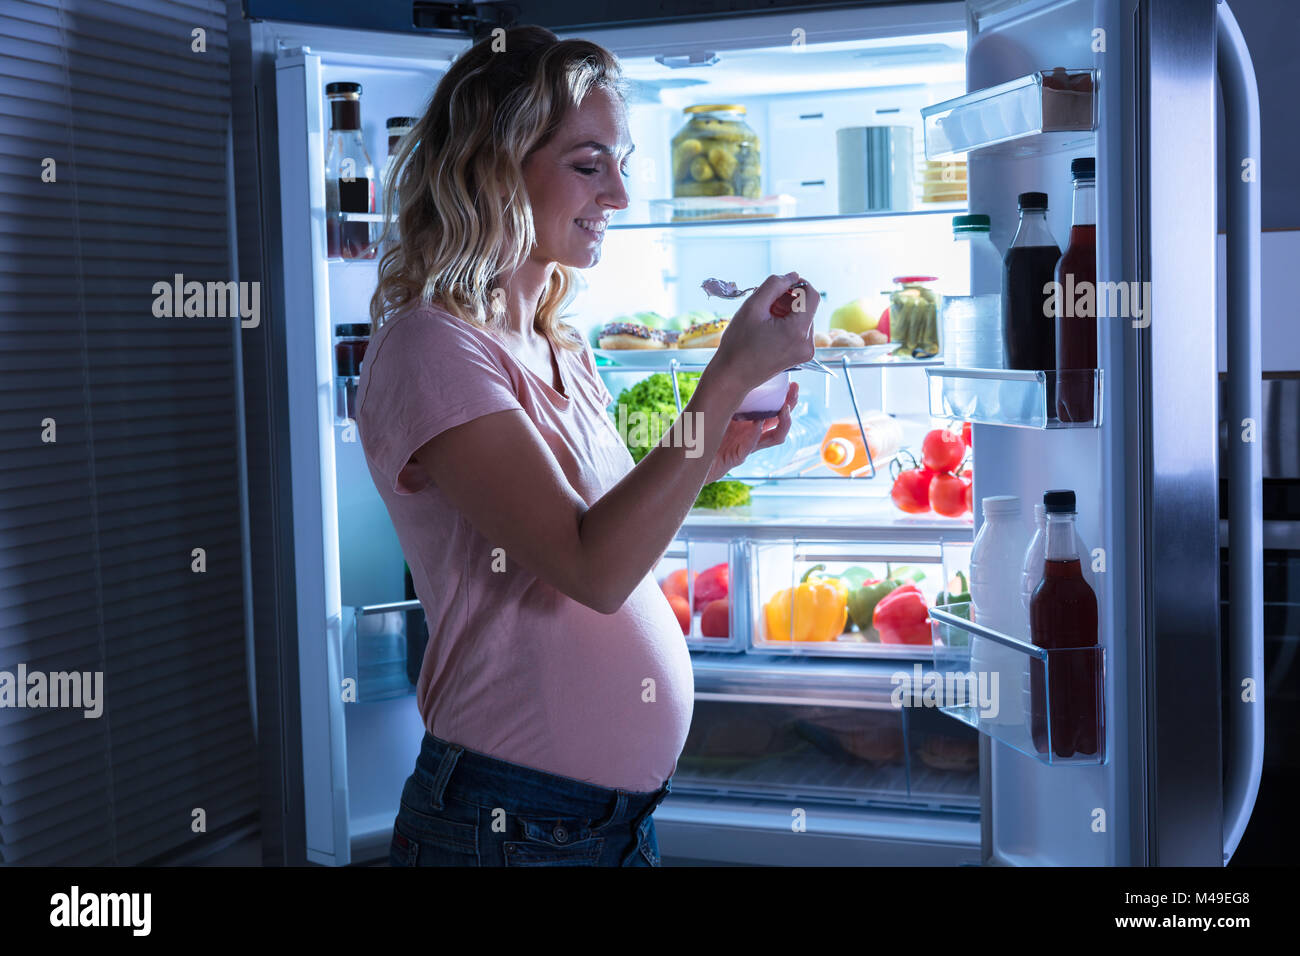 Young Pregnant Woman Eating Ice Cream In Front Of Open Refrigerator Stock Photo